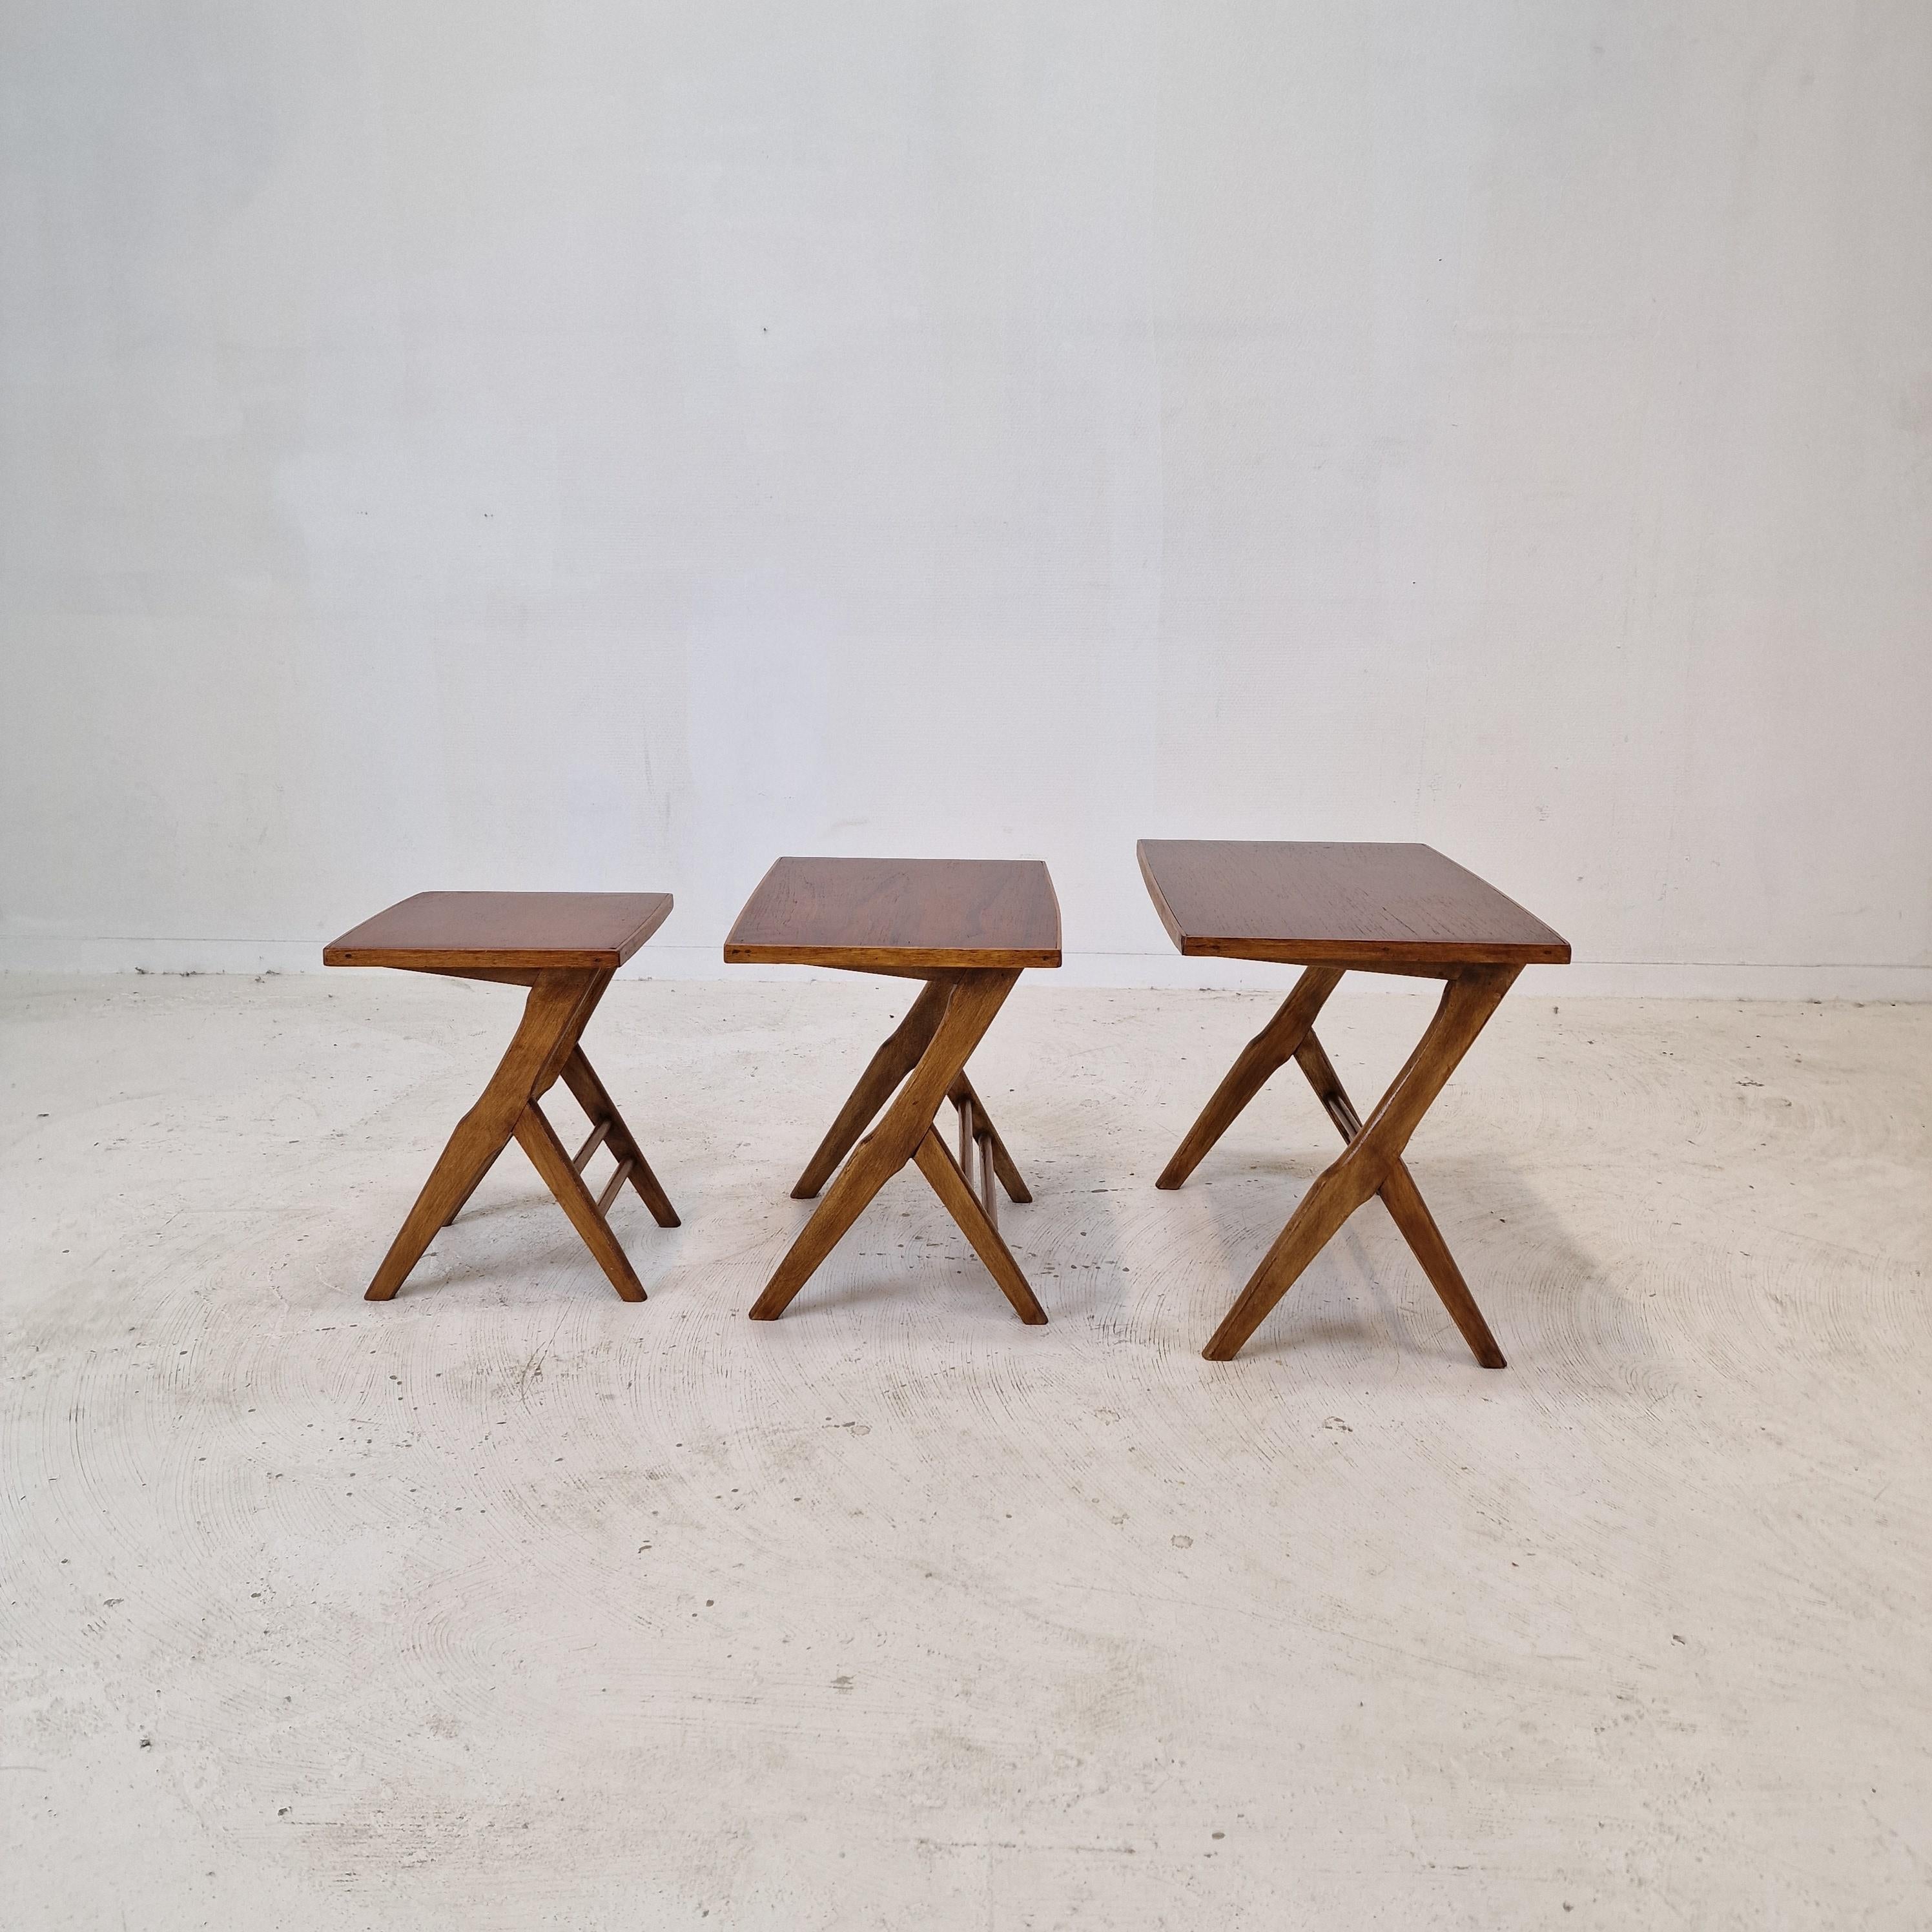 Set of 3 Wooden Nesting Tables, Holland 1960s In Good Condition For Sale In Oud Beijerland, NL